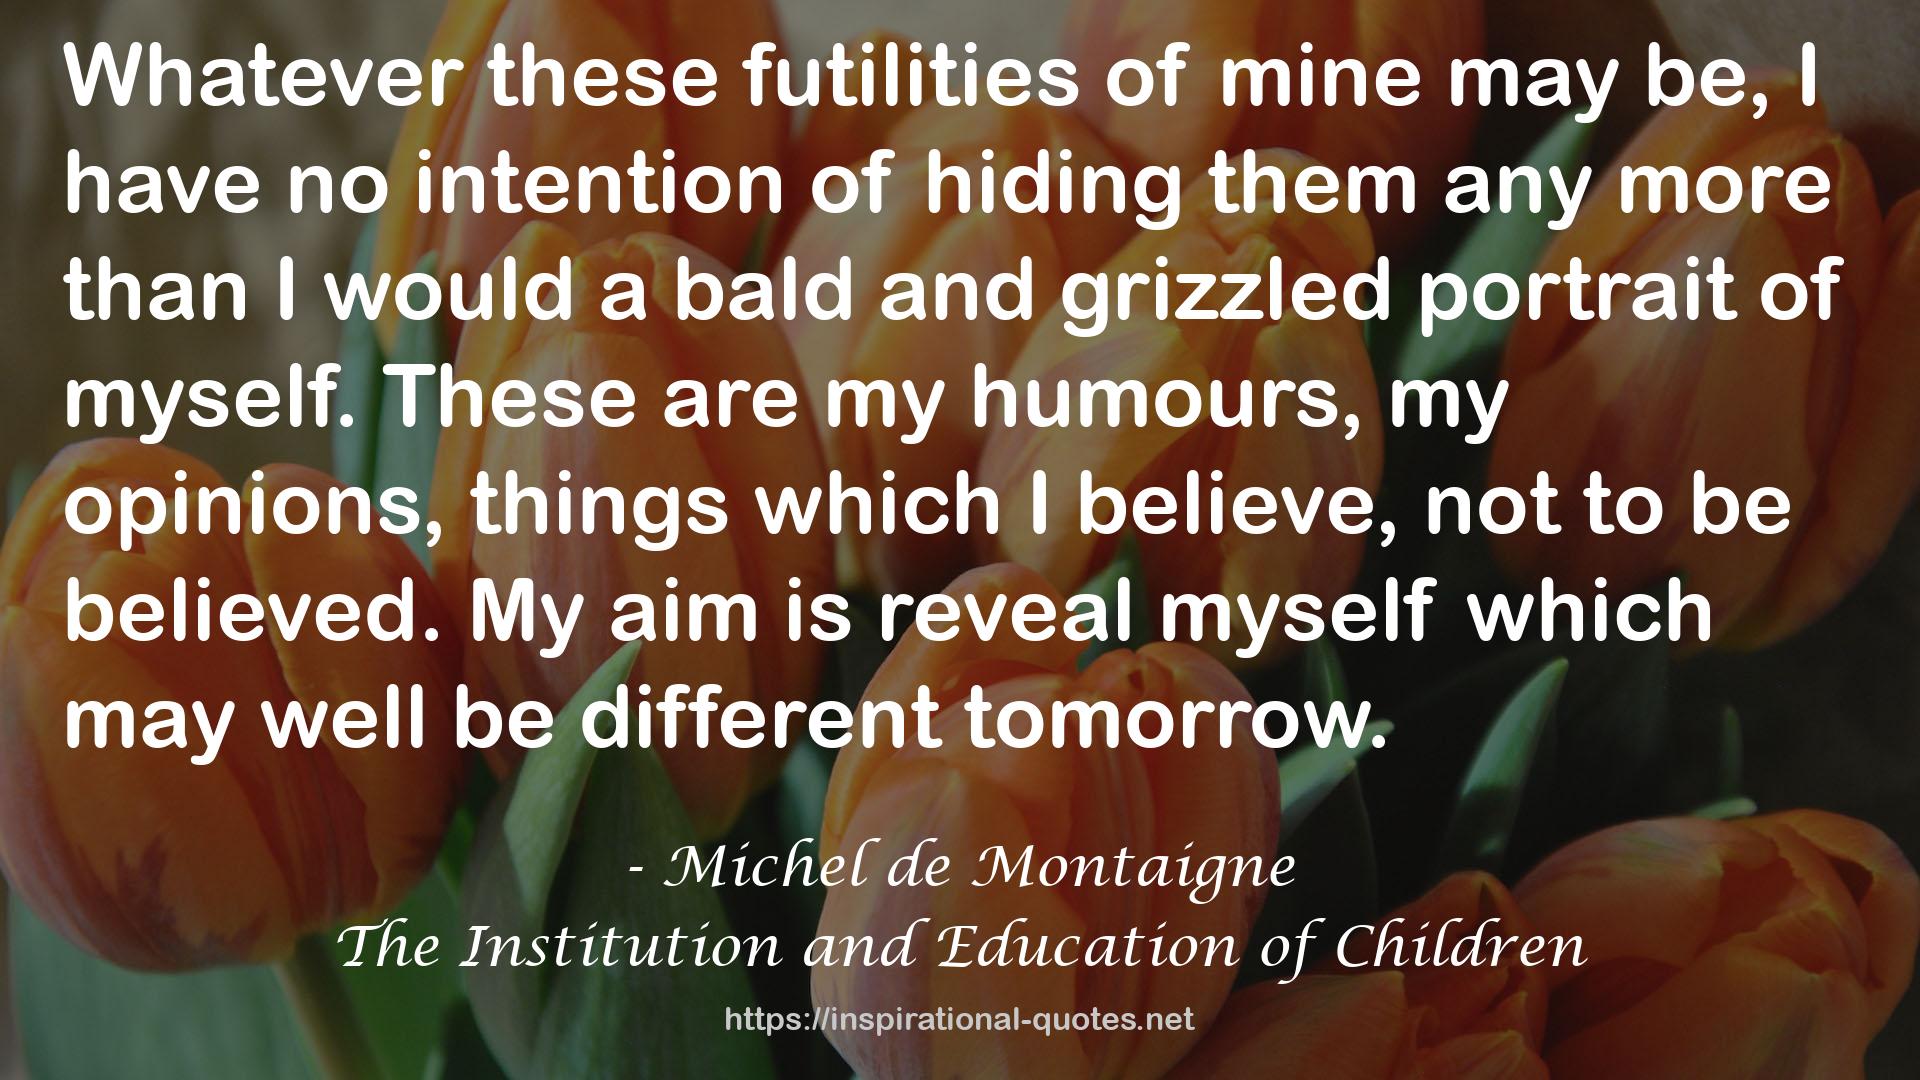 The Institution and Education of Children QUOTES